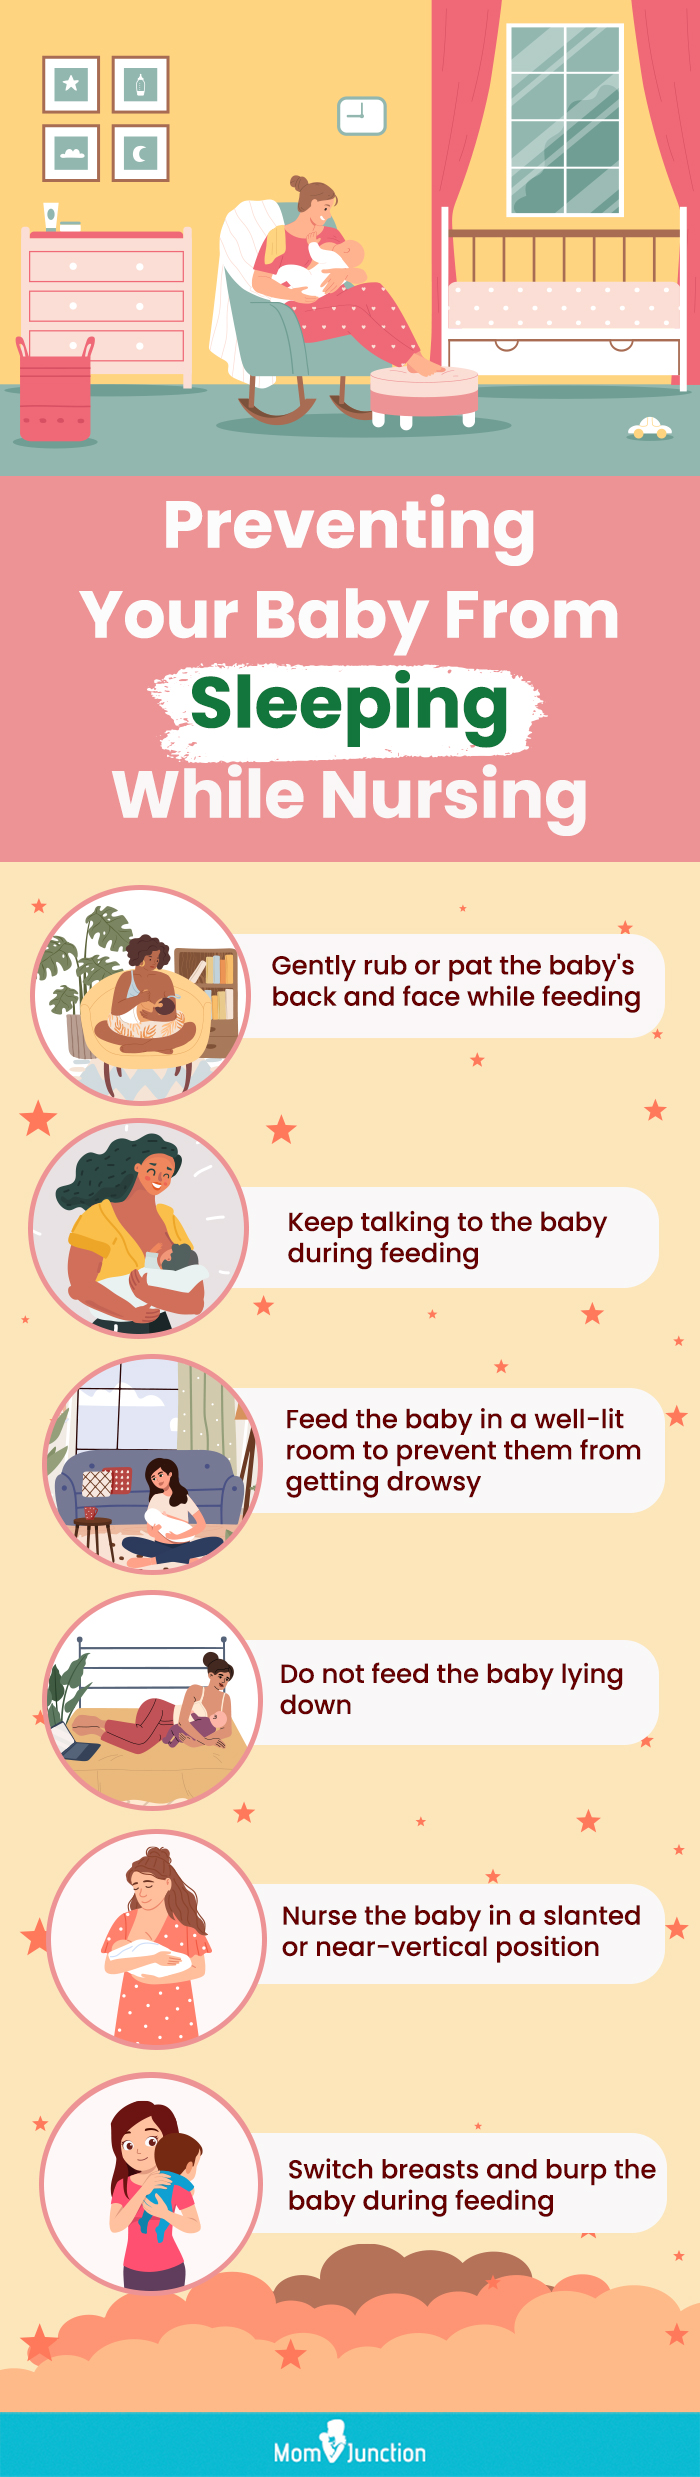 How Breastfeeding Affects Sleep & Tips for Sleeping Better While